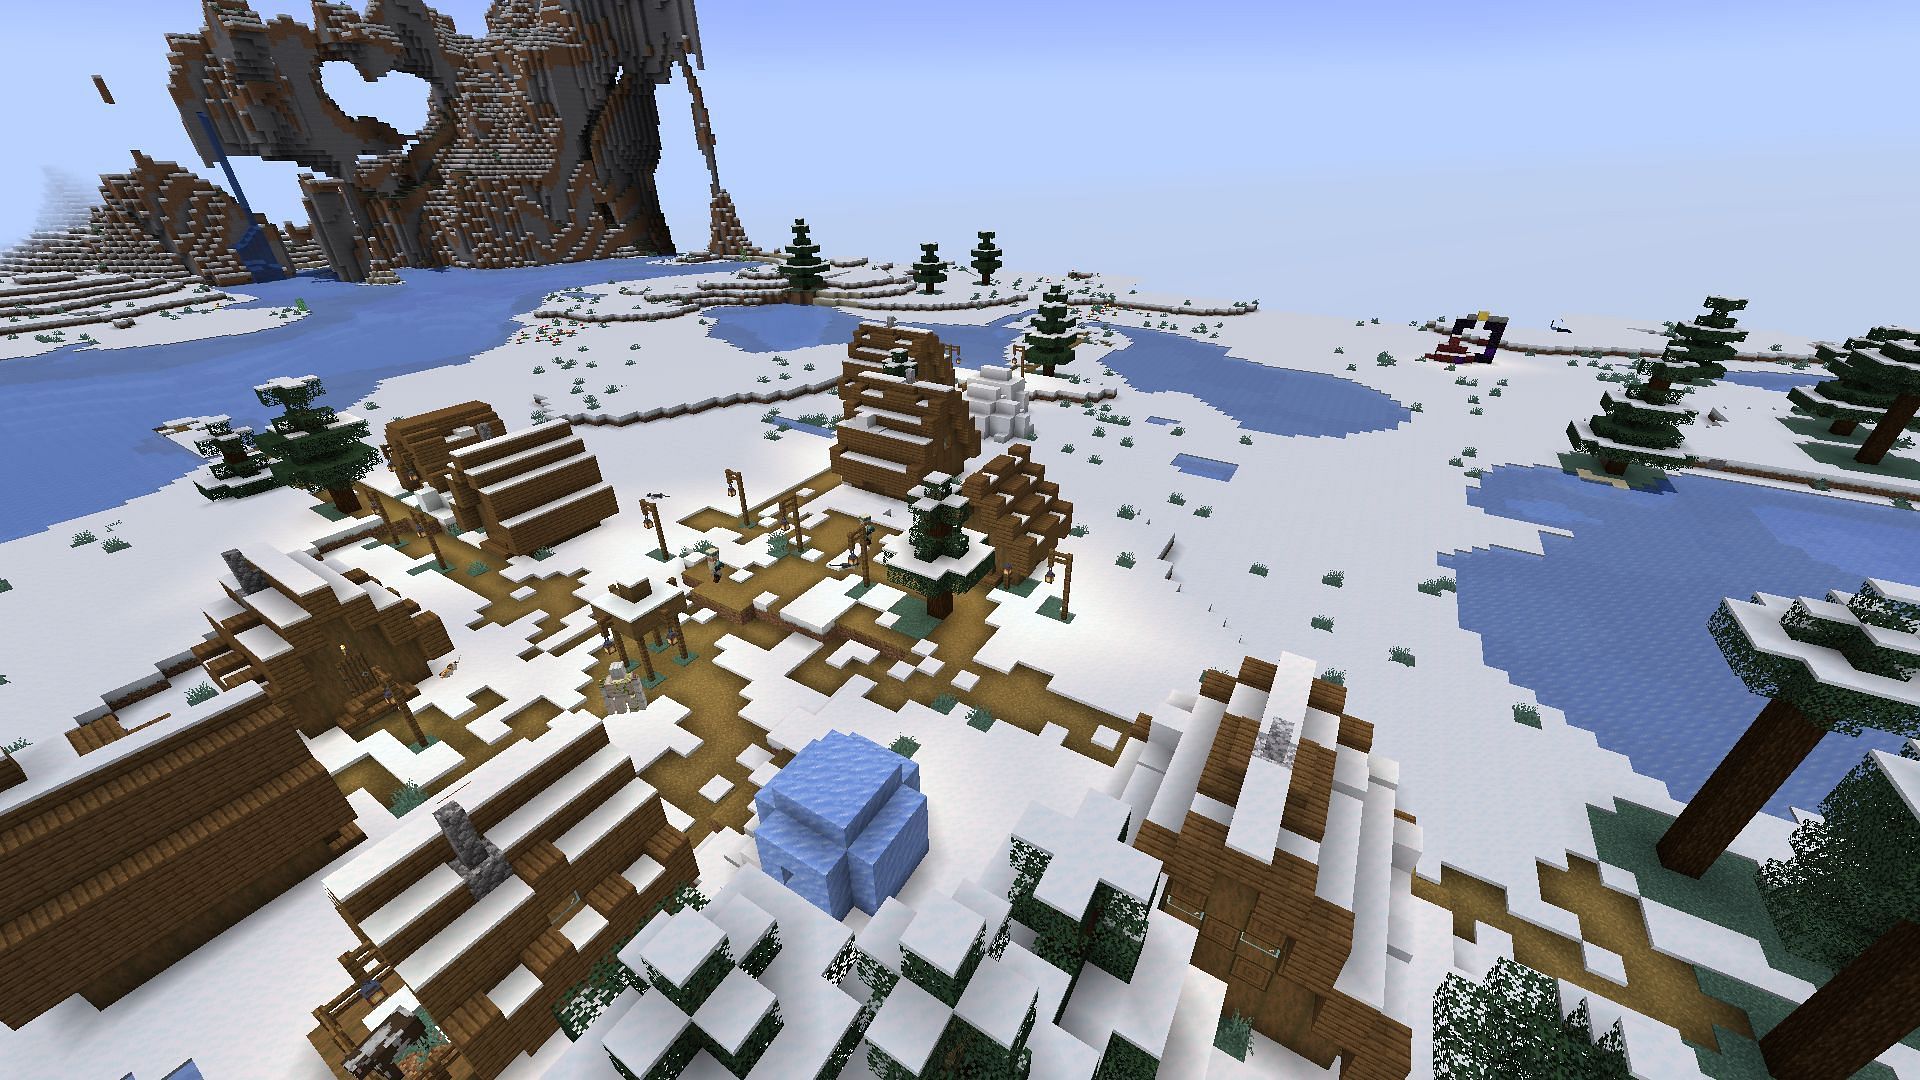 The snowy village and ruined portal near spawn (Image via Minecraft)